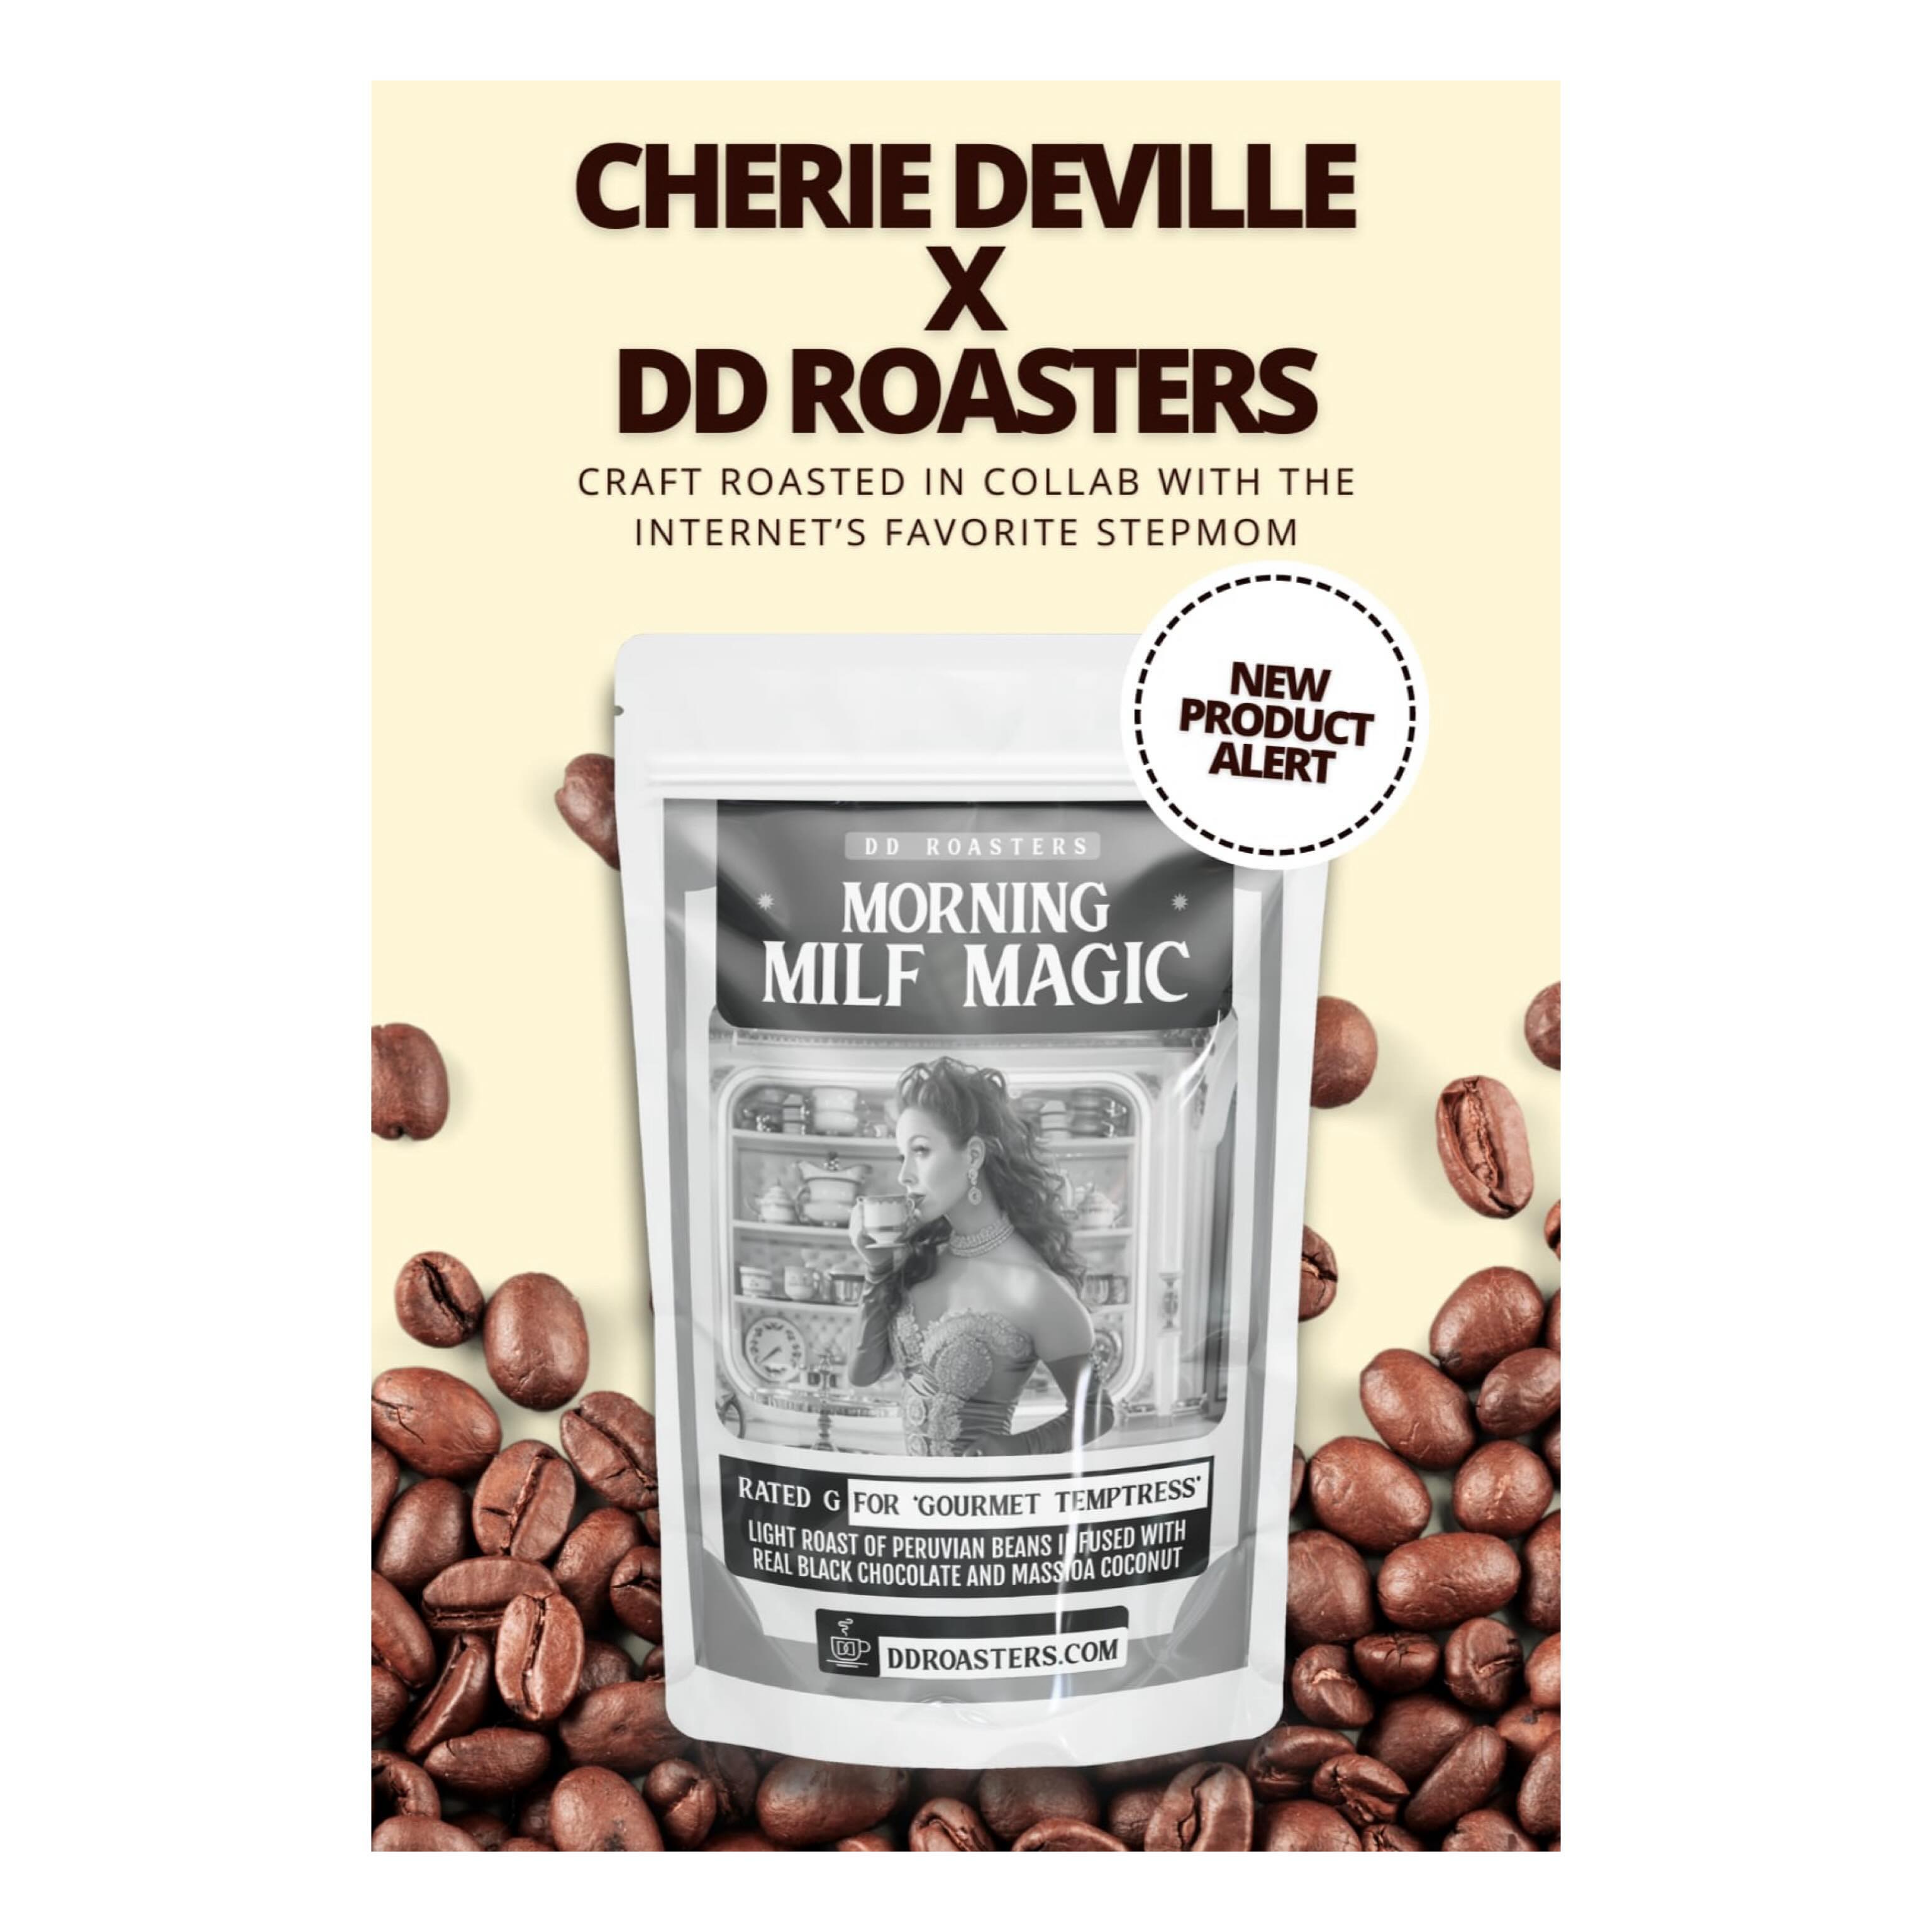 So stoked on this collab with @cheriedevillexo for @dd_roasters ! ☕️🤍

Grab a bag here: ddroasters.com